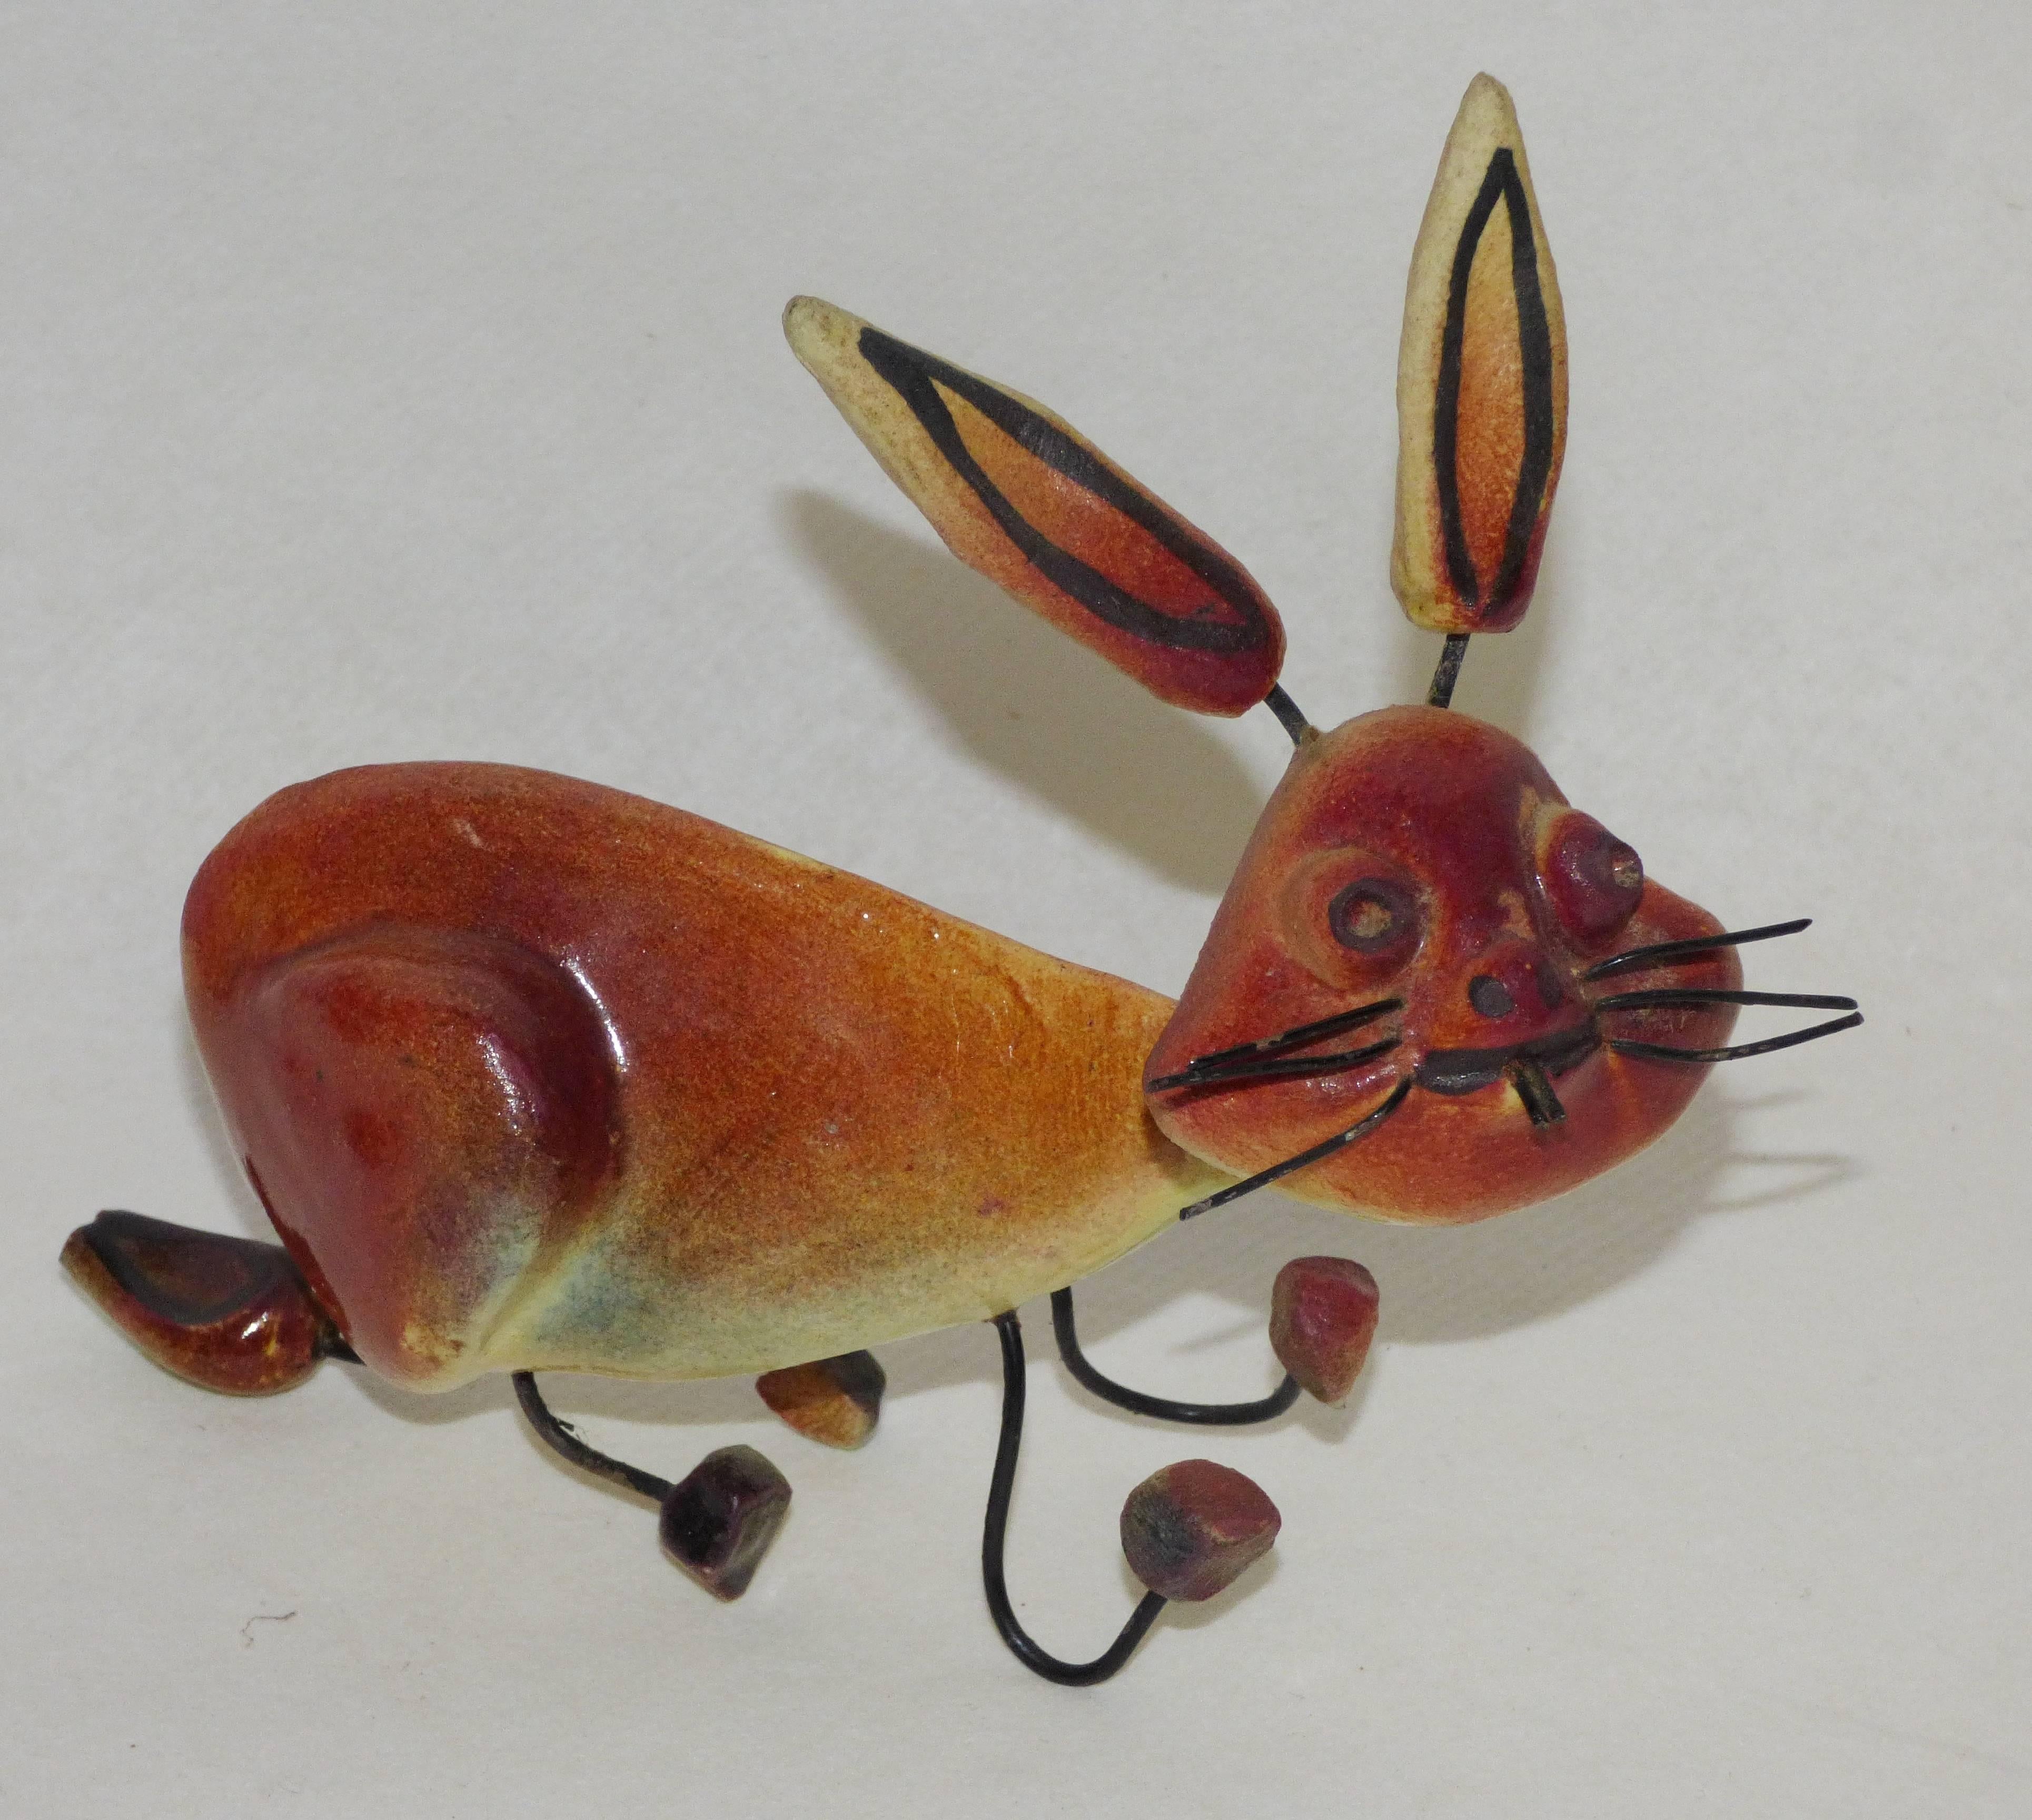 Accolay, three animals in wire and ceramic: cat, pelican and rabbit. Signed.